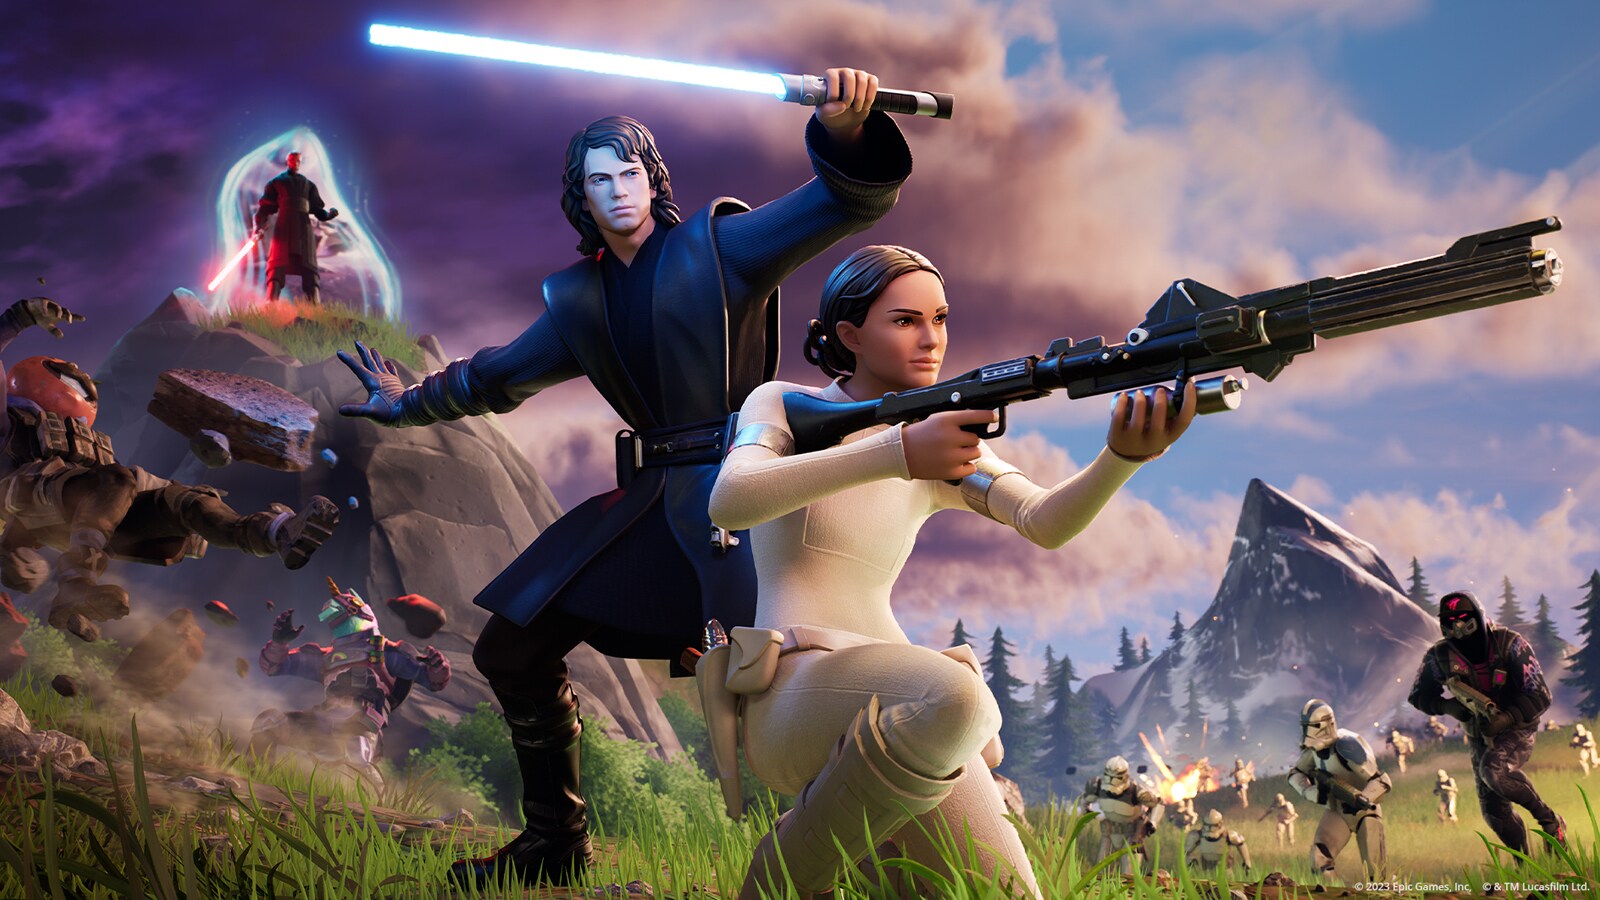 By Forcely Xxx Video - New Star Wars x Fortnite Activation to Celebrate the Prequel Trilogy |  StarWars.com